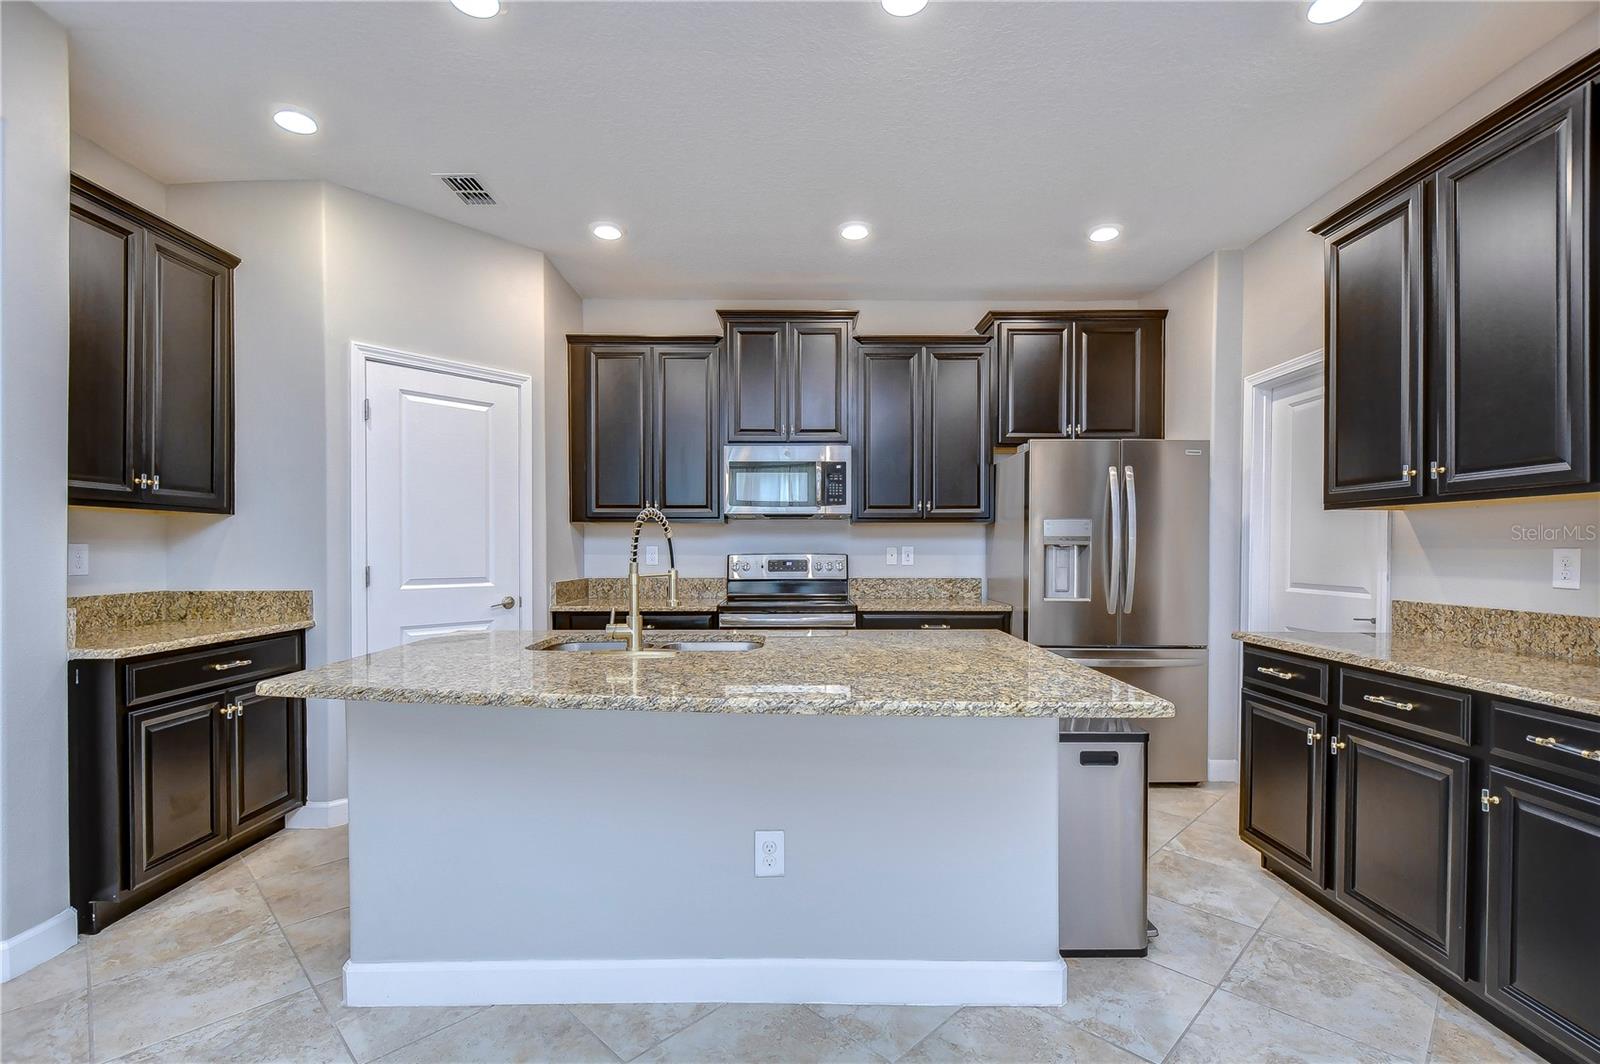 Heart of this home is its expansive kitchen!